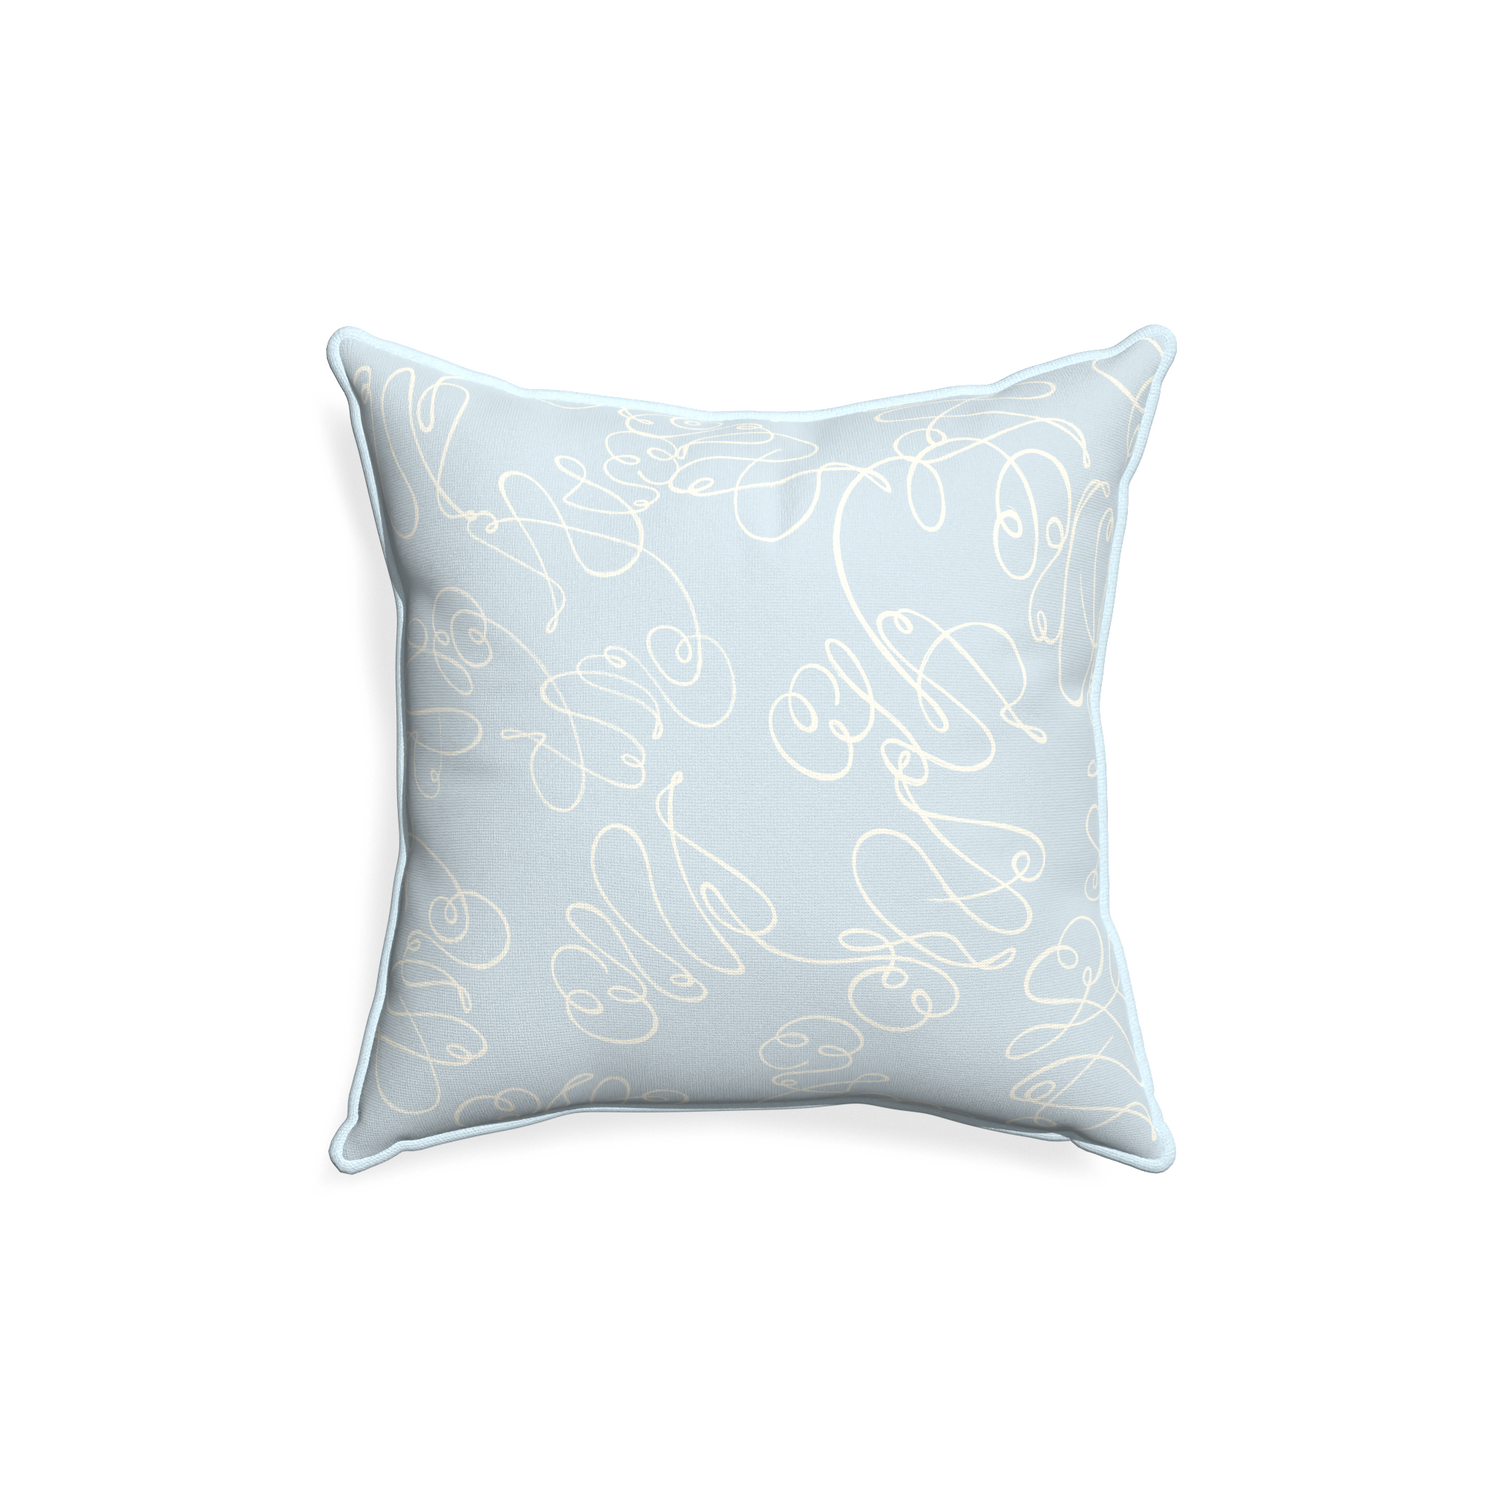 18-square mirabella custom powder blue abstractpillow with powder piping on white background